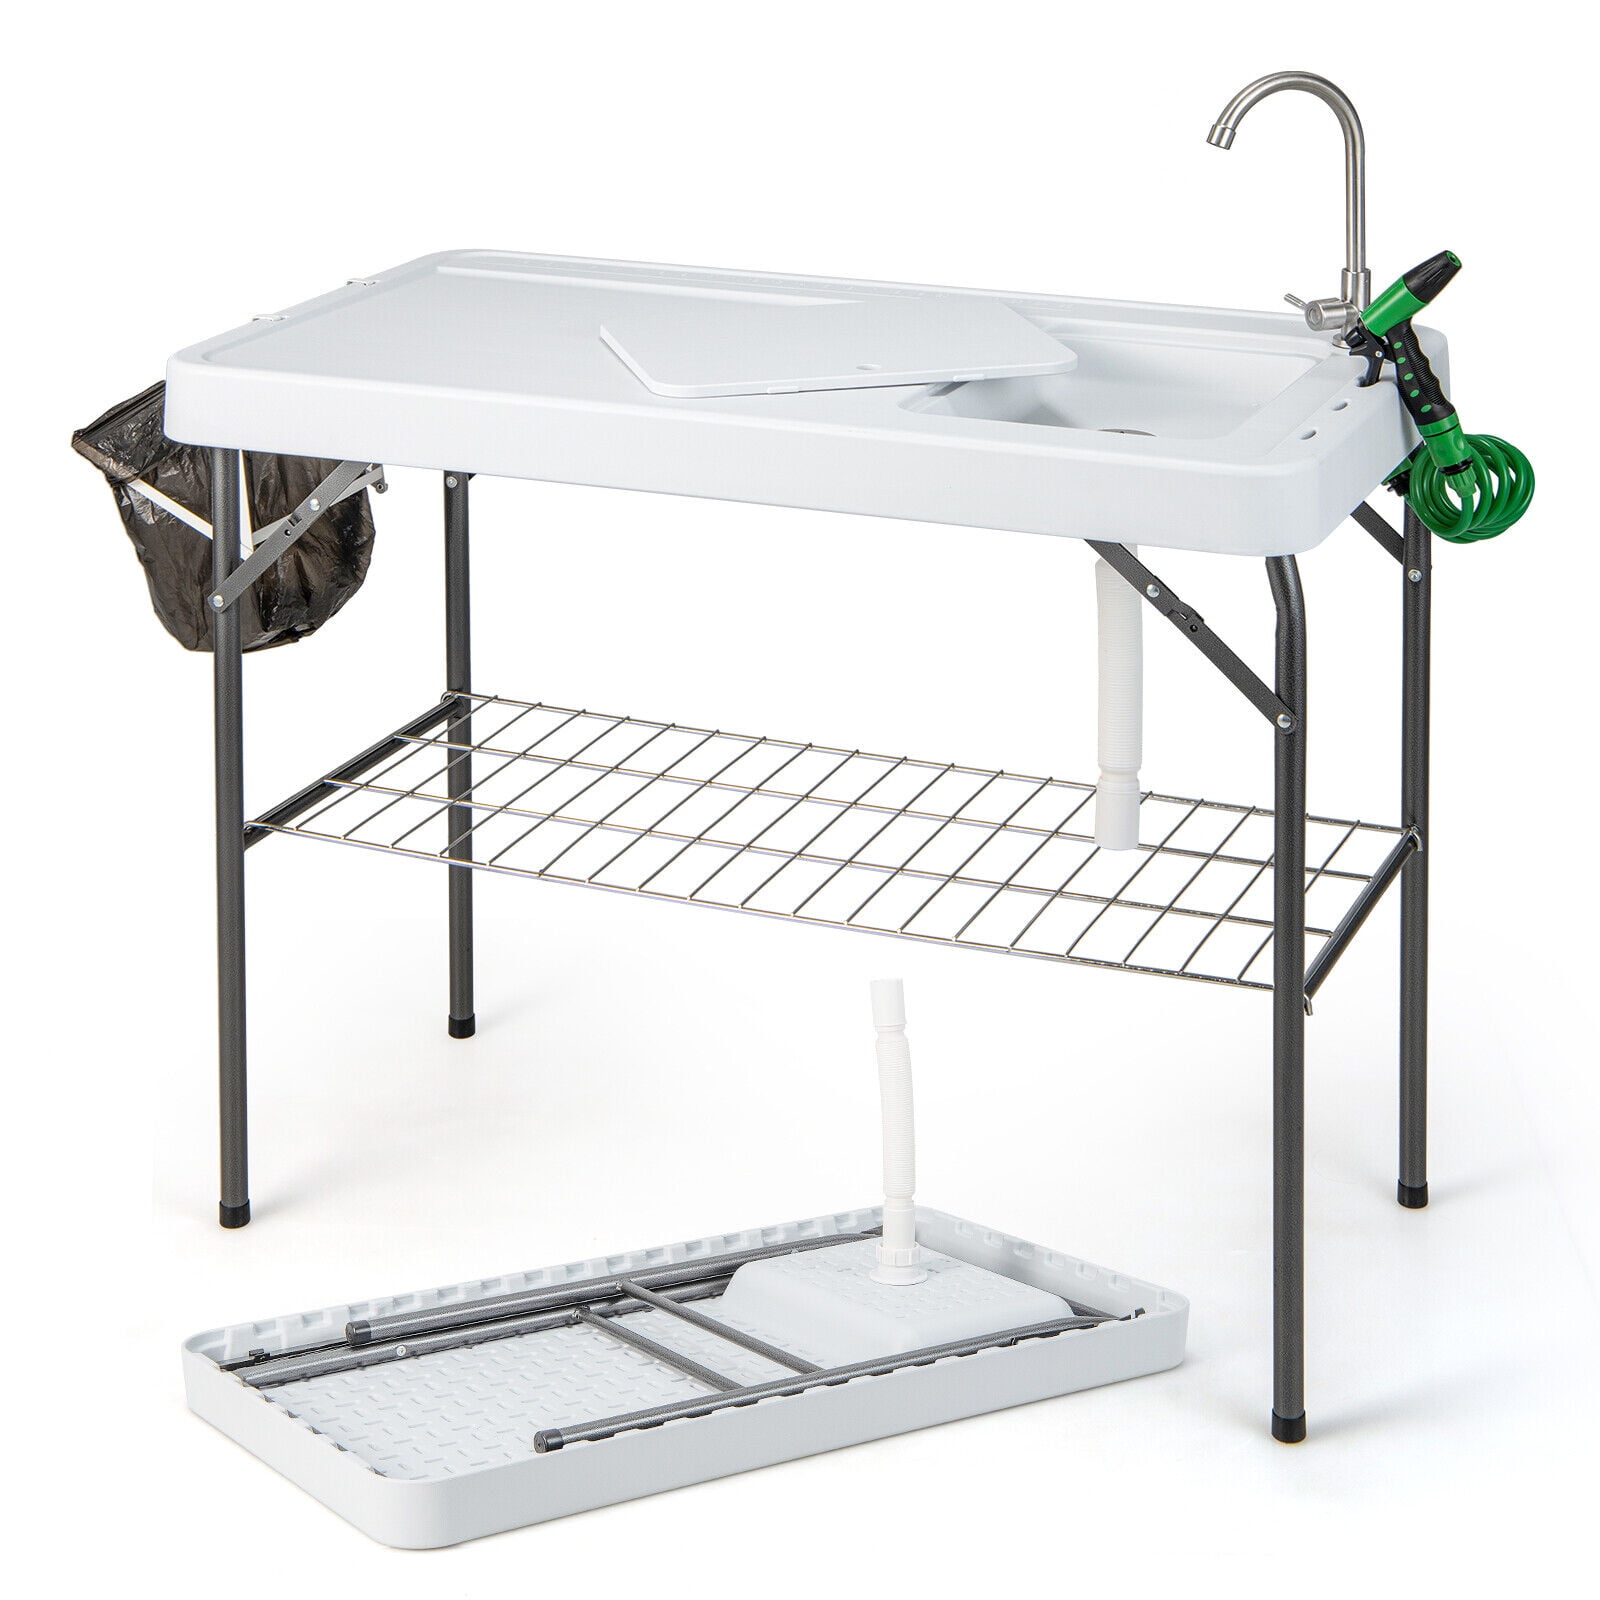  Giantex Fish Cleaning Table w/ 2 Sinks, Faucet, Hose Hook Up,  Portable Folding Camping Table w/Measure Mark, Outdoor Fillet Cleaning  Station for Fishing Beach Picnic (with Sprayer & Storage Shelf) 